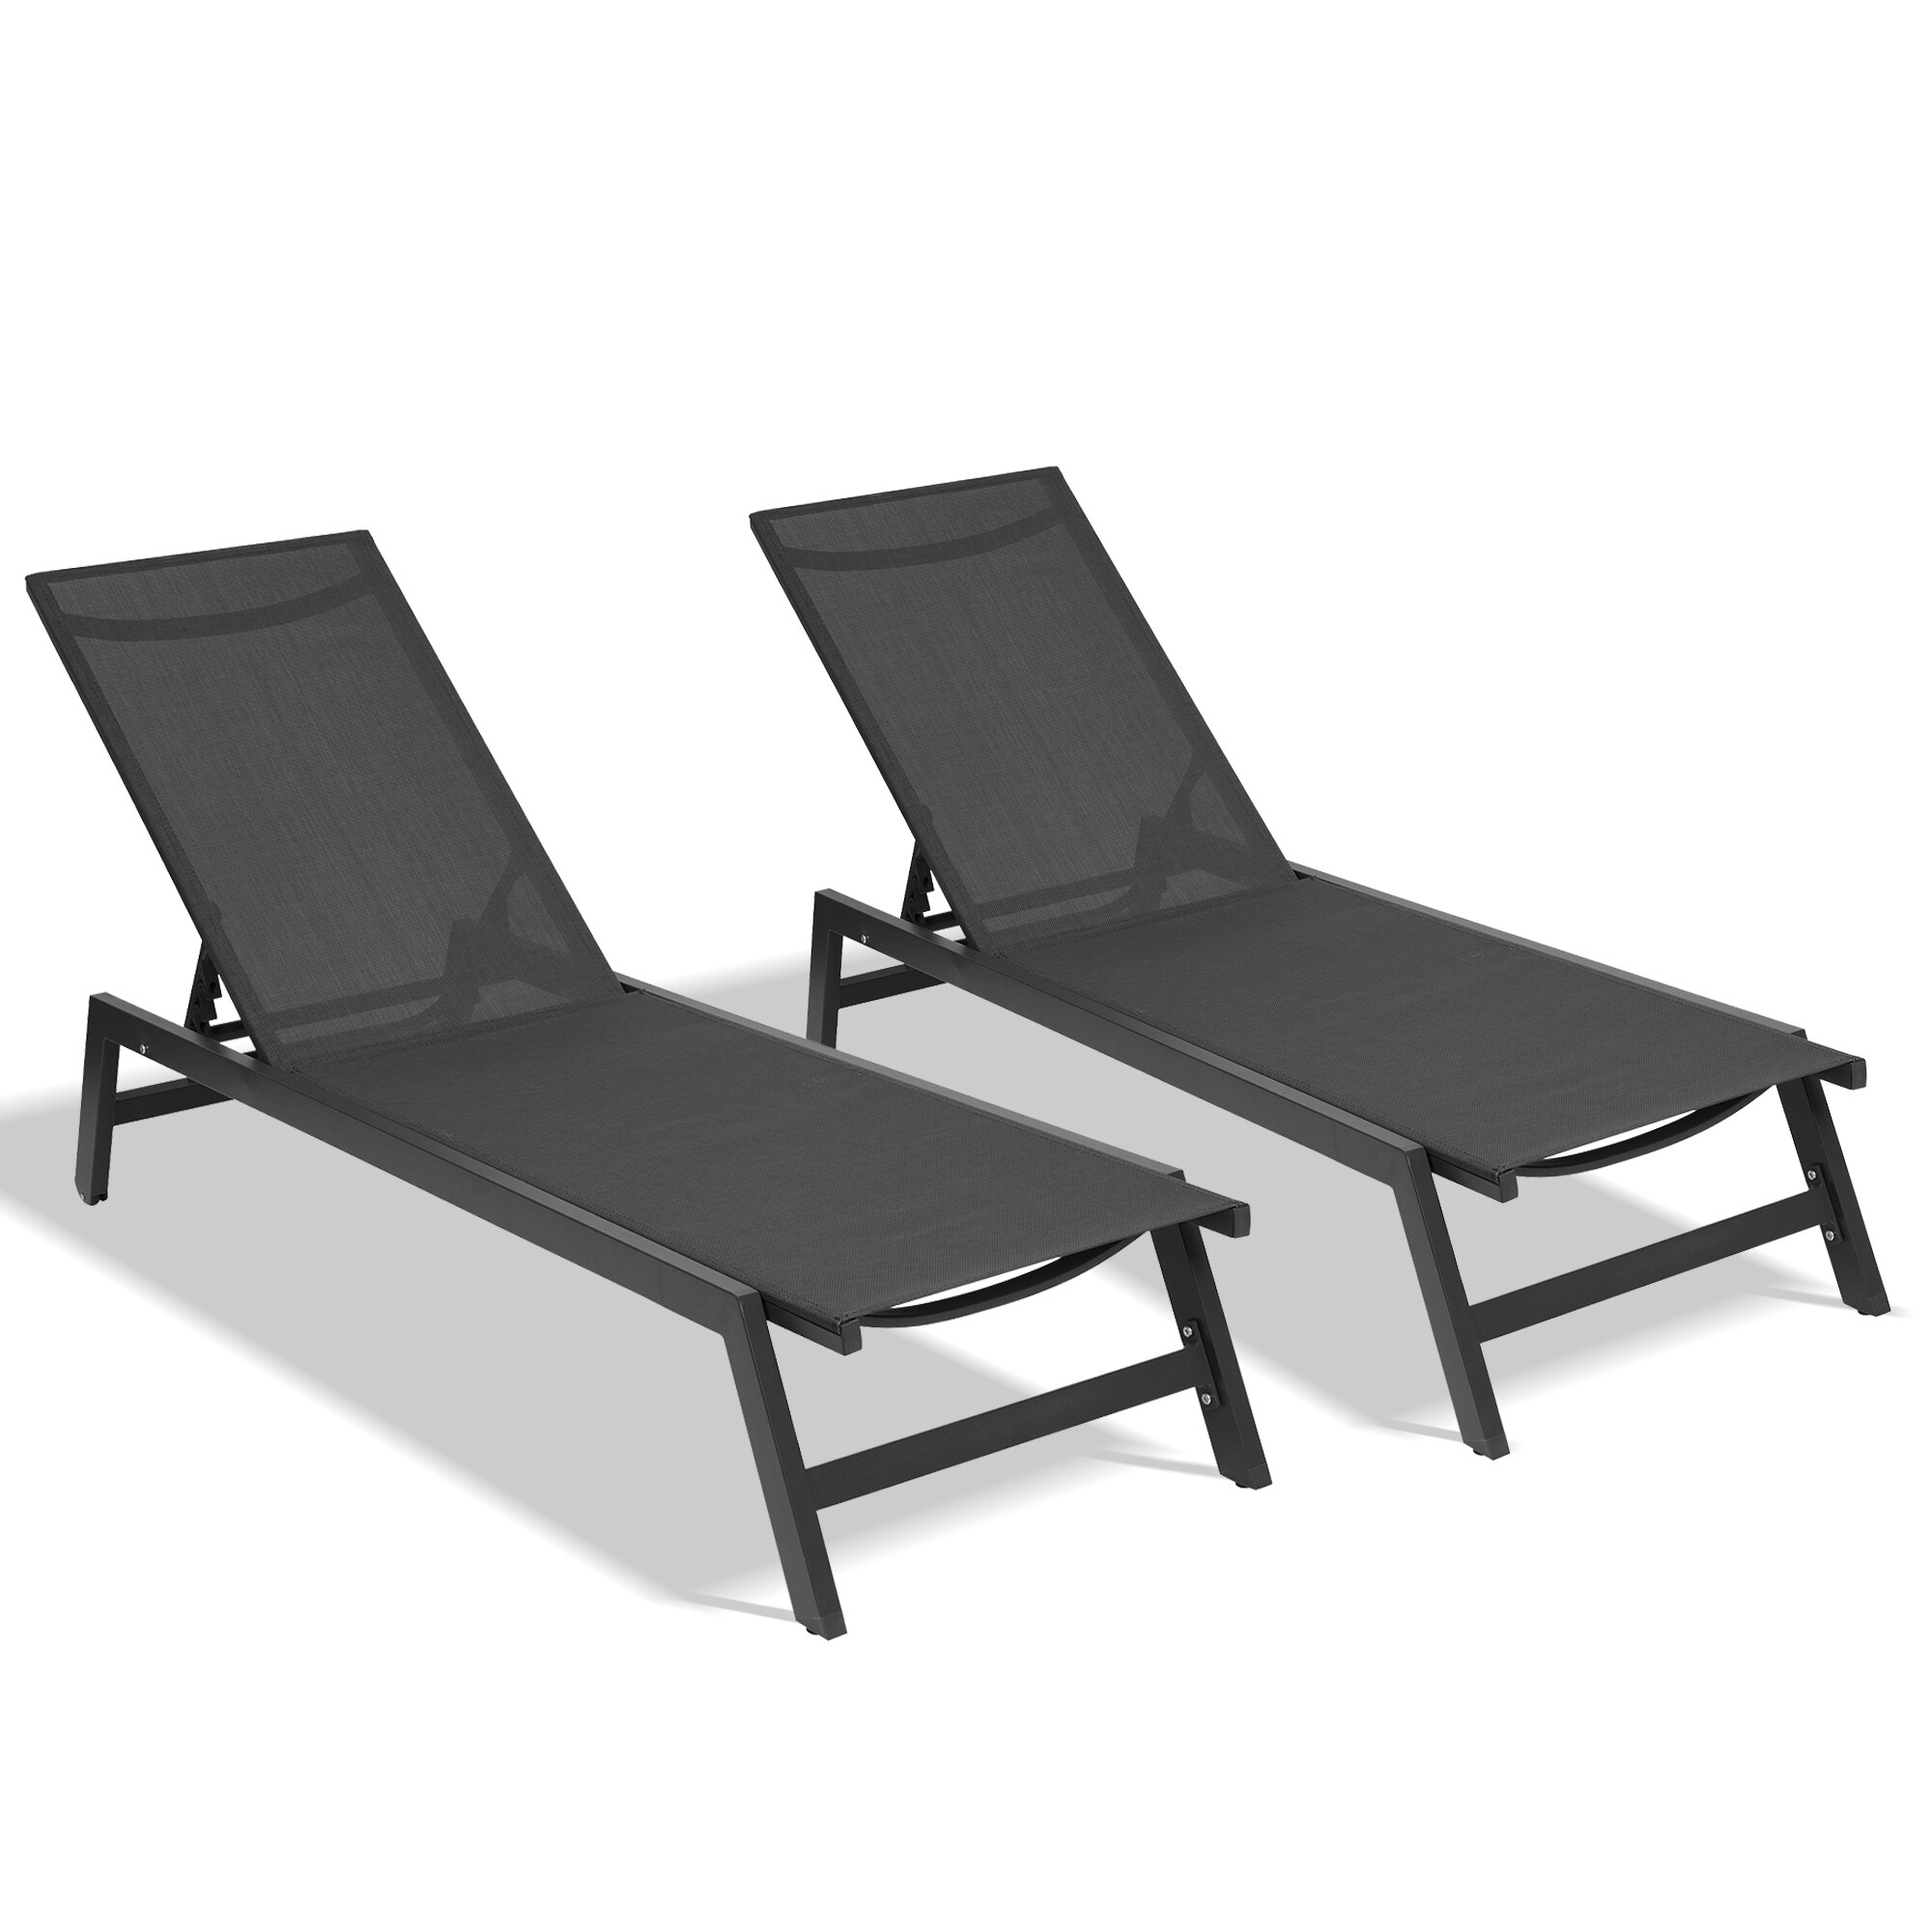 2-pcs Outdoor Chaise Lounge Chair